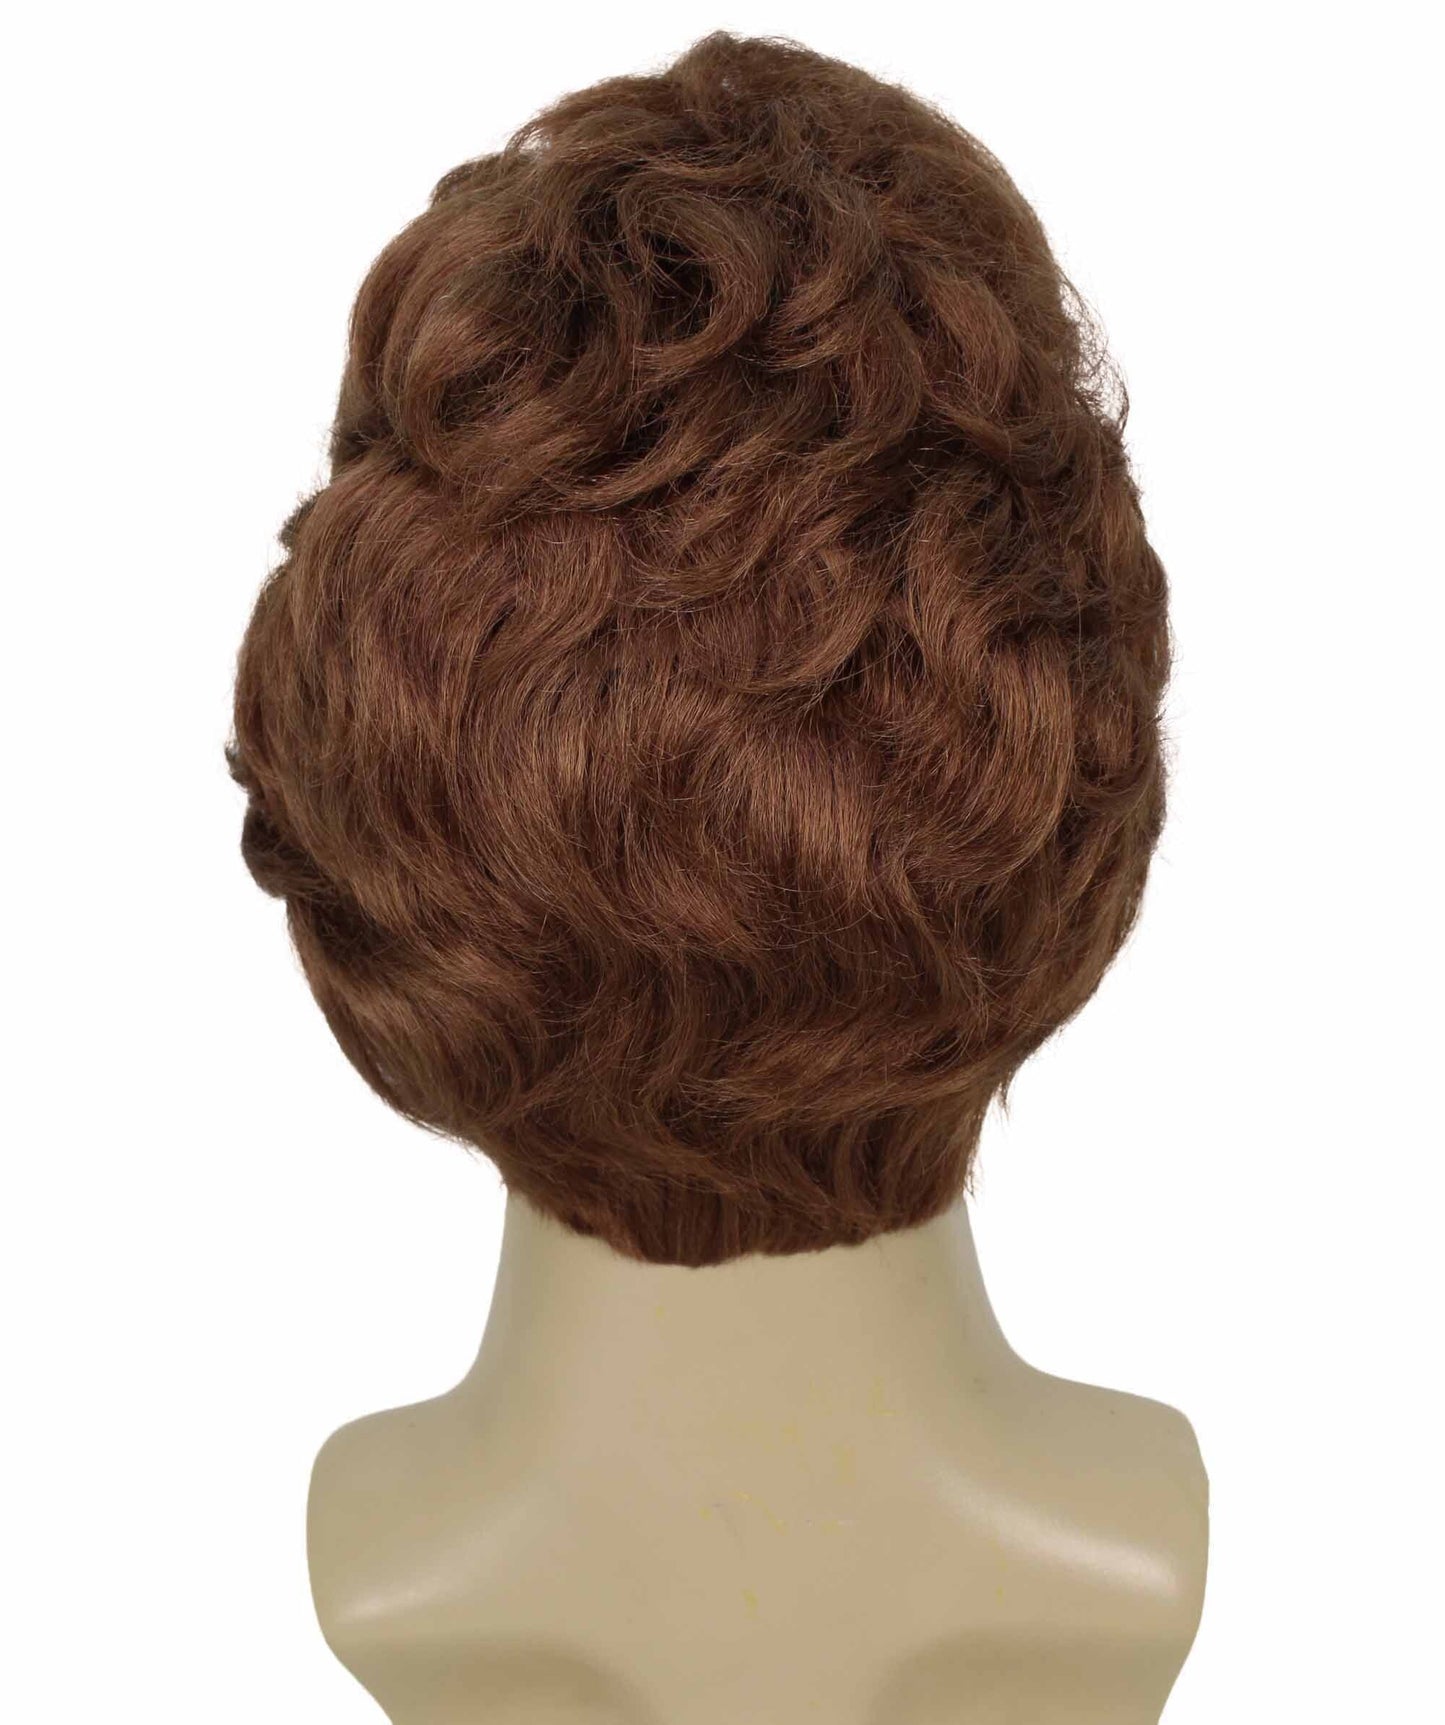 Men’s Iconic Animated Character Young Version Brown Wig